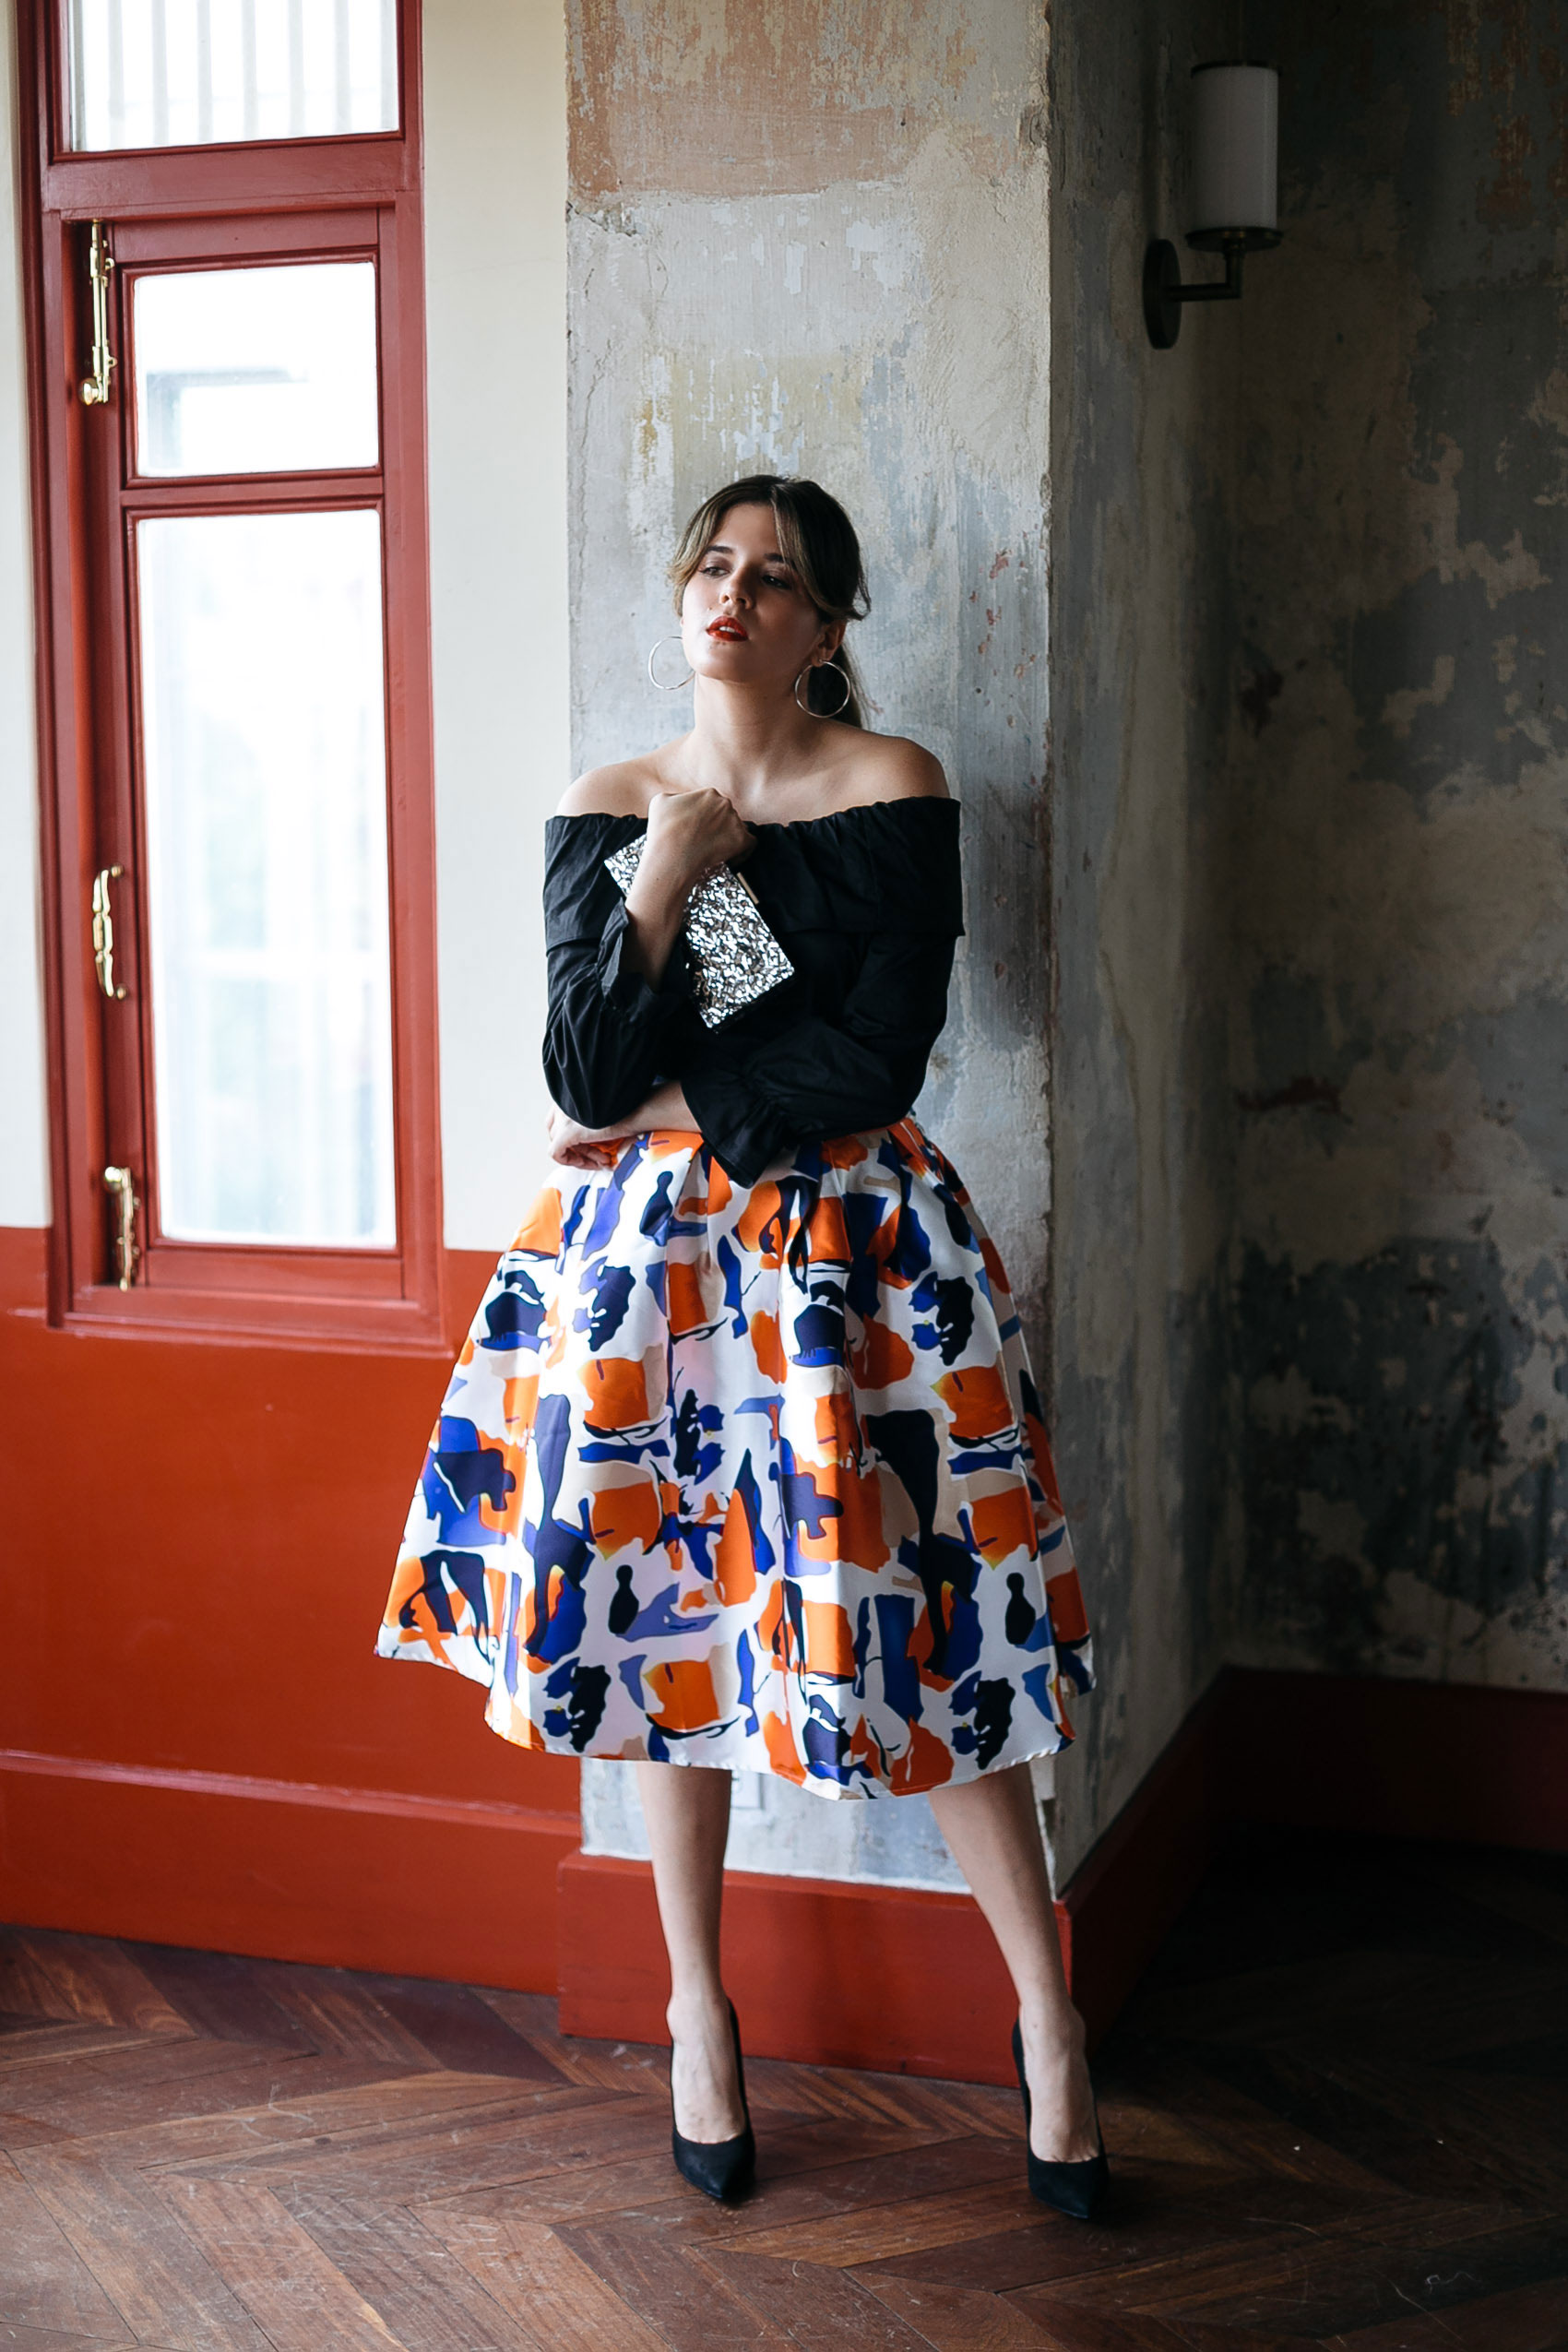 Big skirt New Year's Eve party outfit idea by Maristella